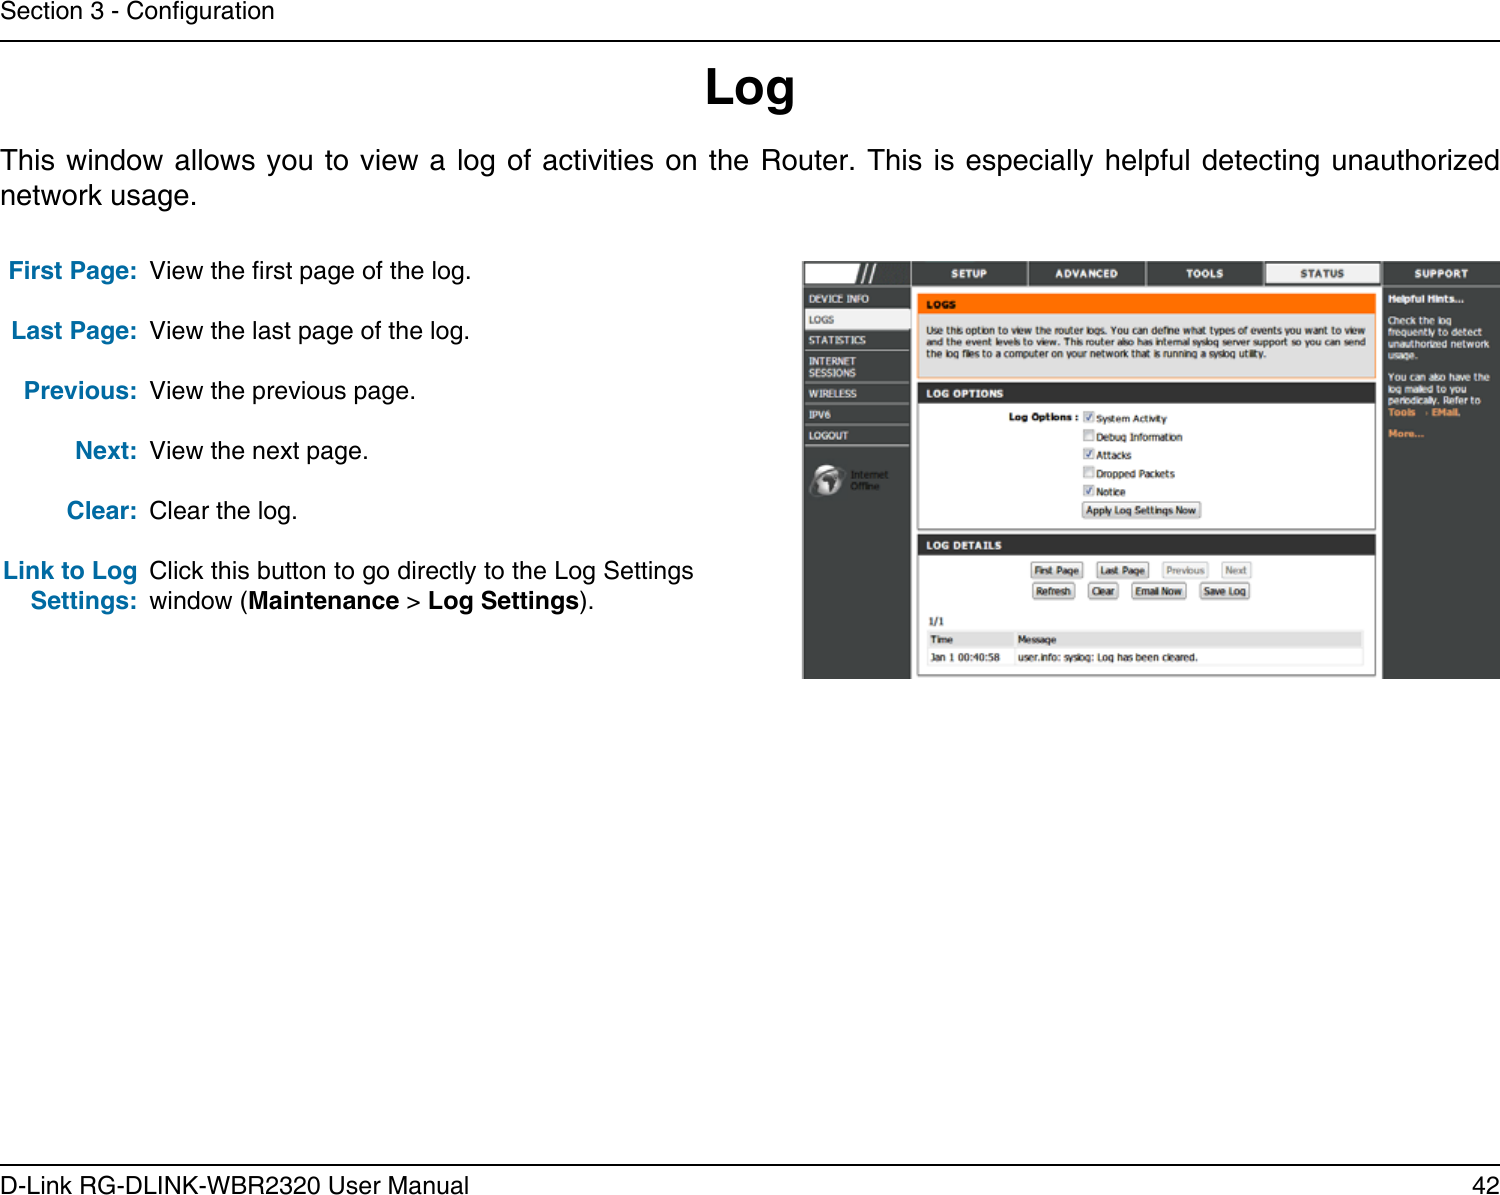 42D-Link RG-DLINK-WBR2320 User ManualSection 3 - CongurationLogFirst Page:Last Page:Previous:Next:Clear:Link to Log Settings:View the rst page of the log.View the last page of the log.View the previous page.View the next page.Clear the log.Click this button to go directly to the Log Settings window (Maintenance &gt; Log Settings).This window allows you to view a log of activities on the Router. This is especially helpful detecting unauthorized network usage.